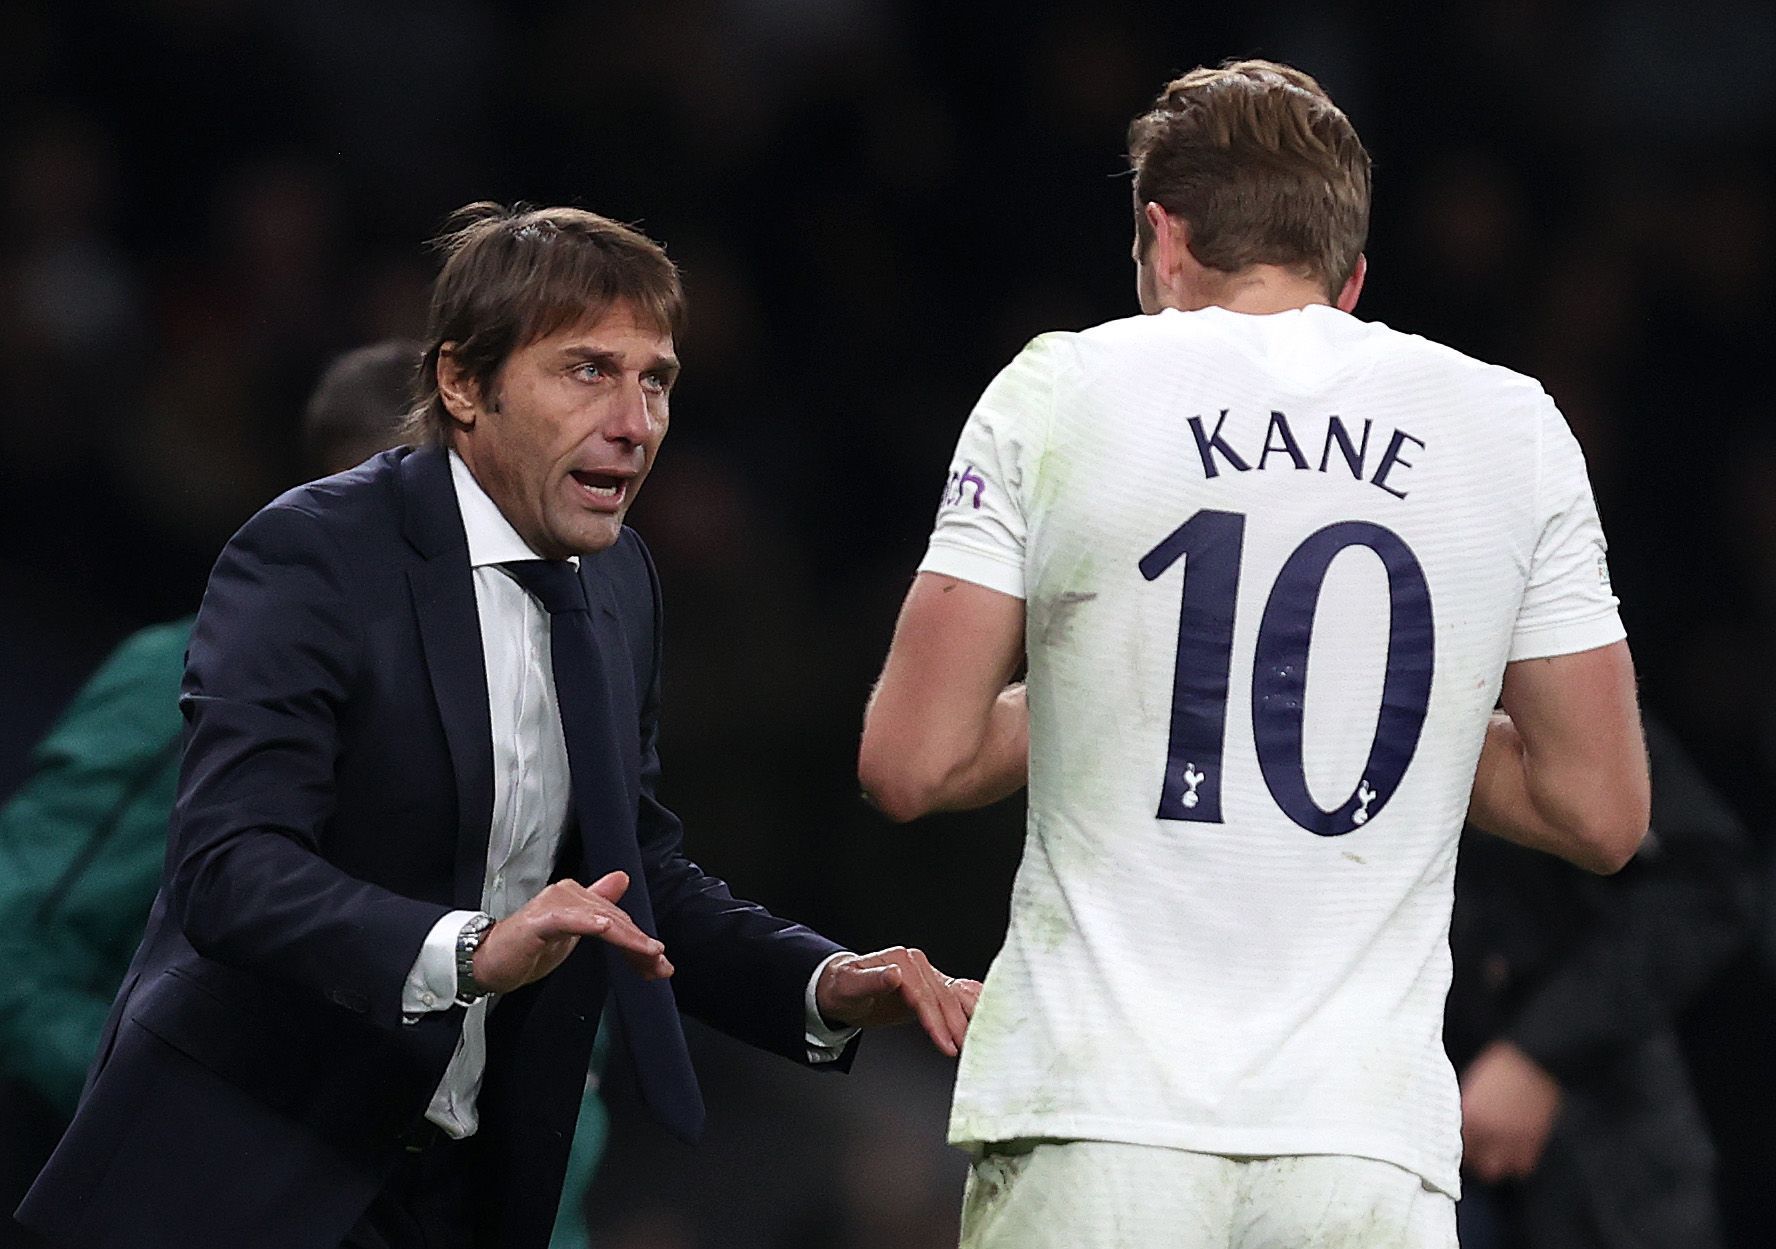 Conte is looking for his first win as Tottenham boss